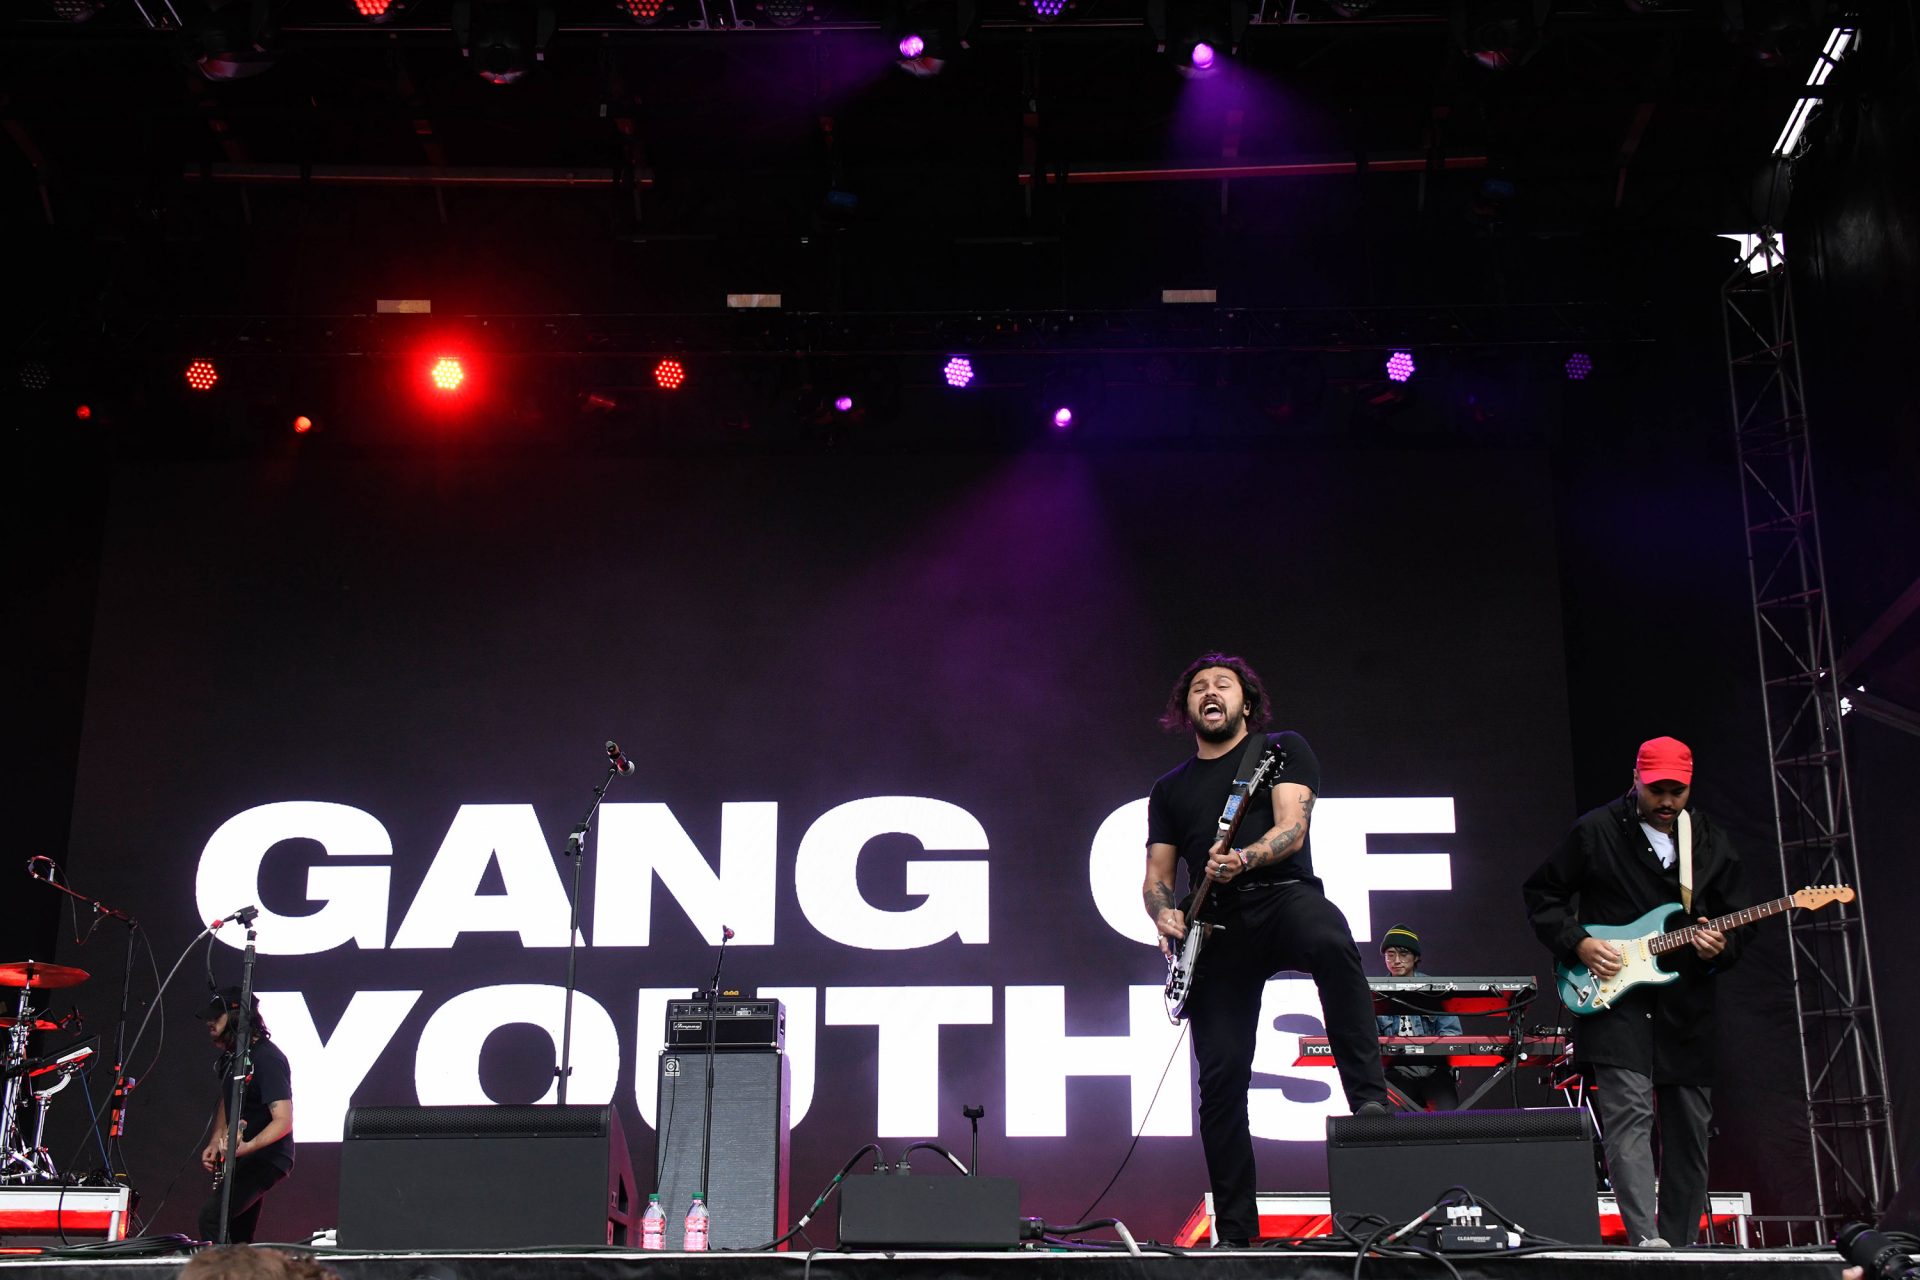 GANG OF YOUTHS